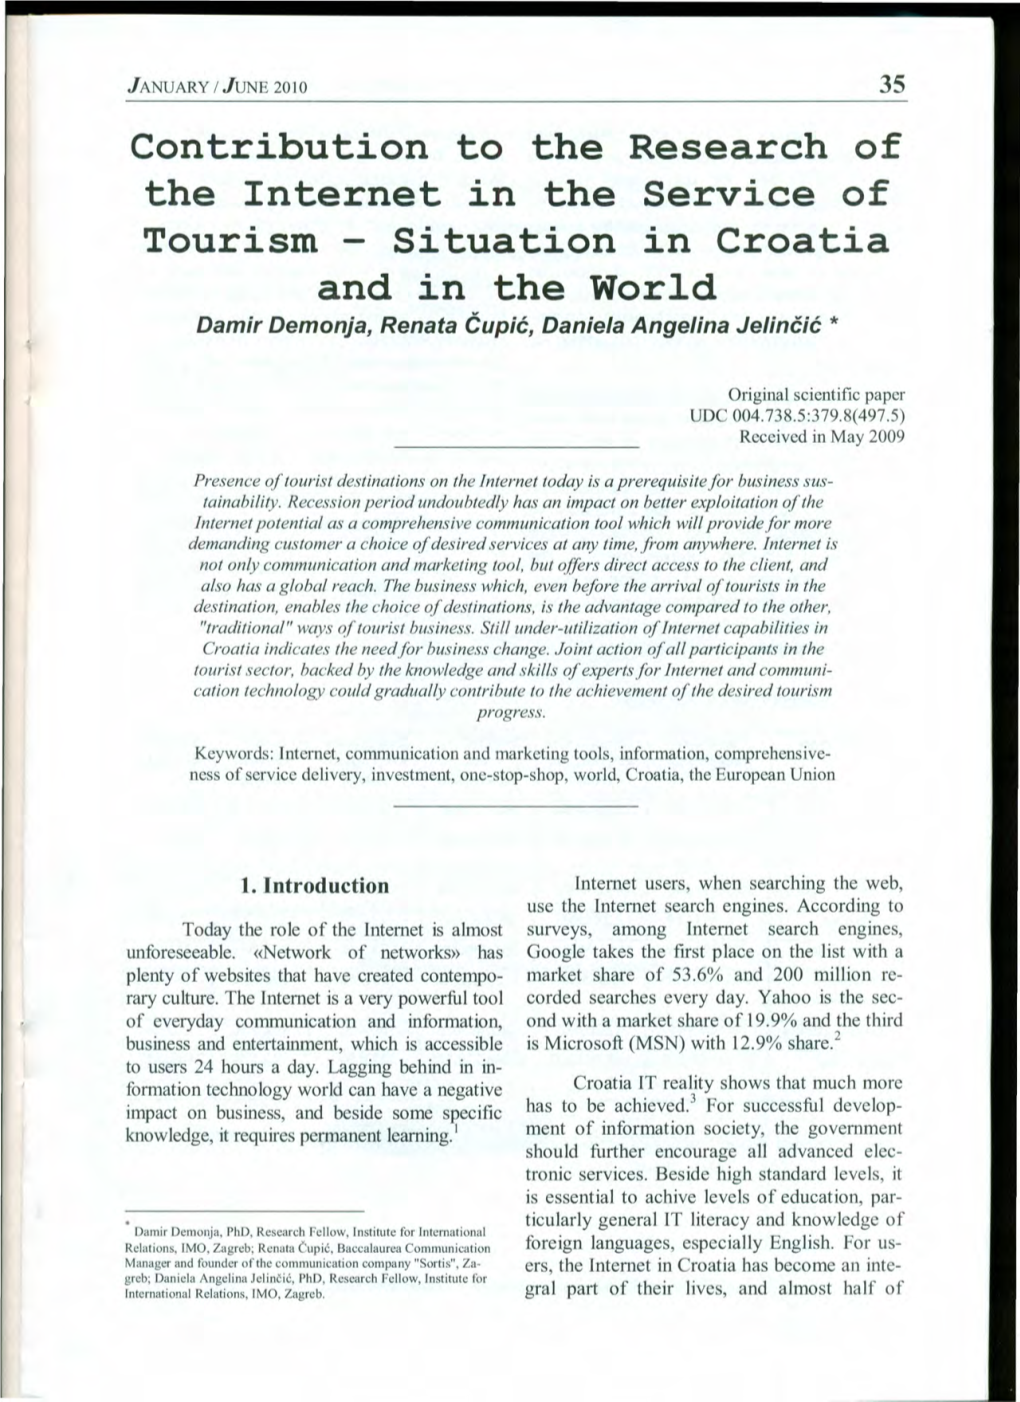 Contribution to the Internet in Tourism and in the Research of Service Of